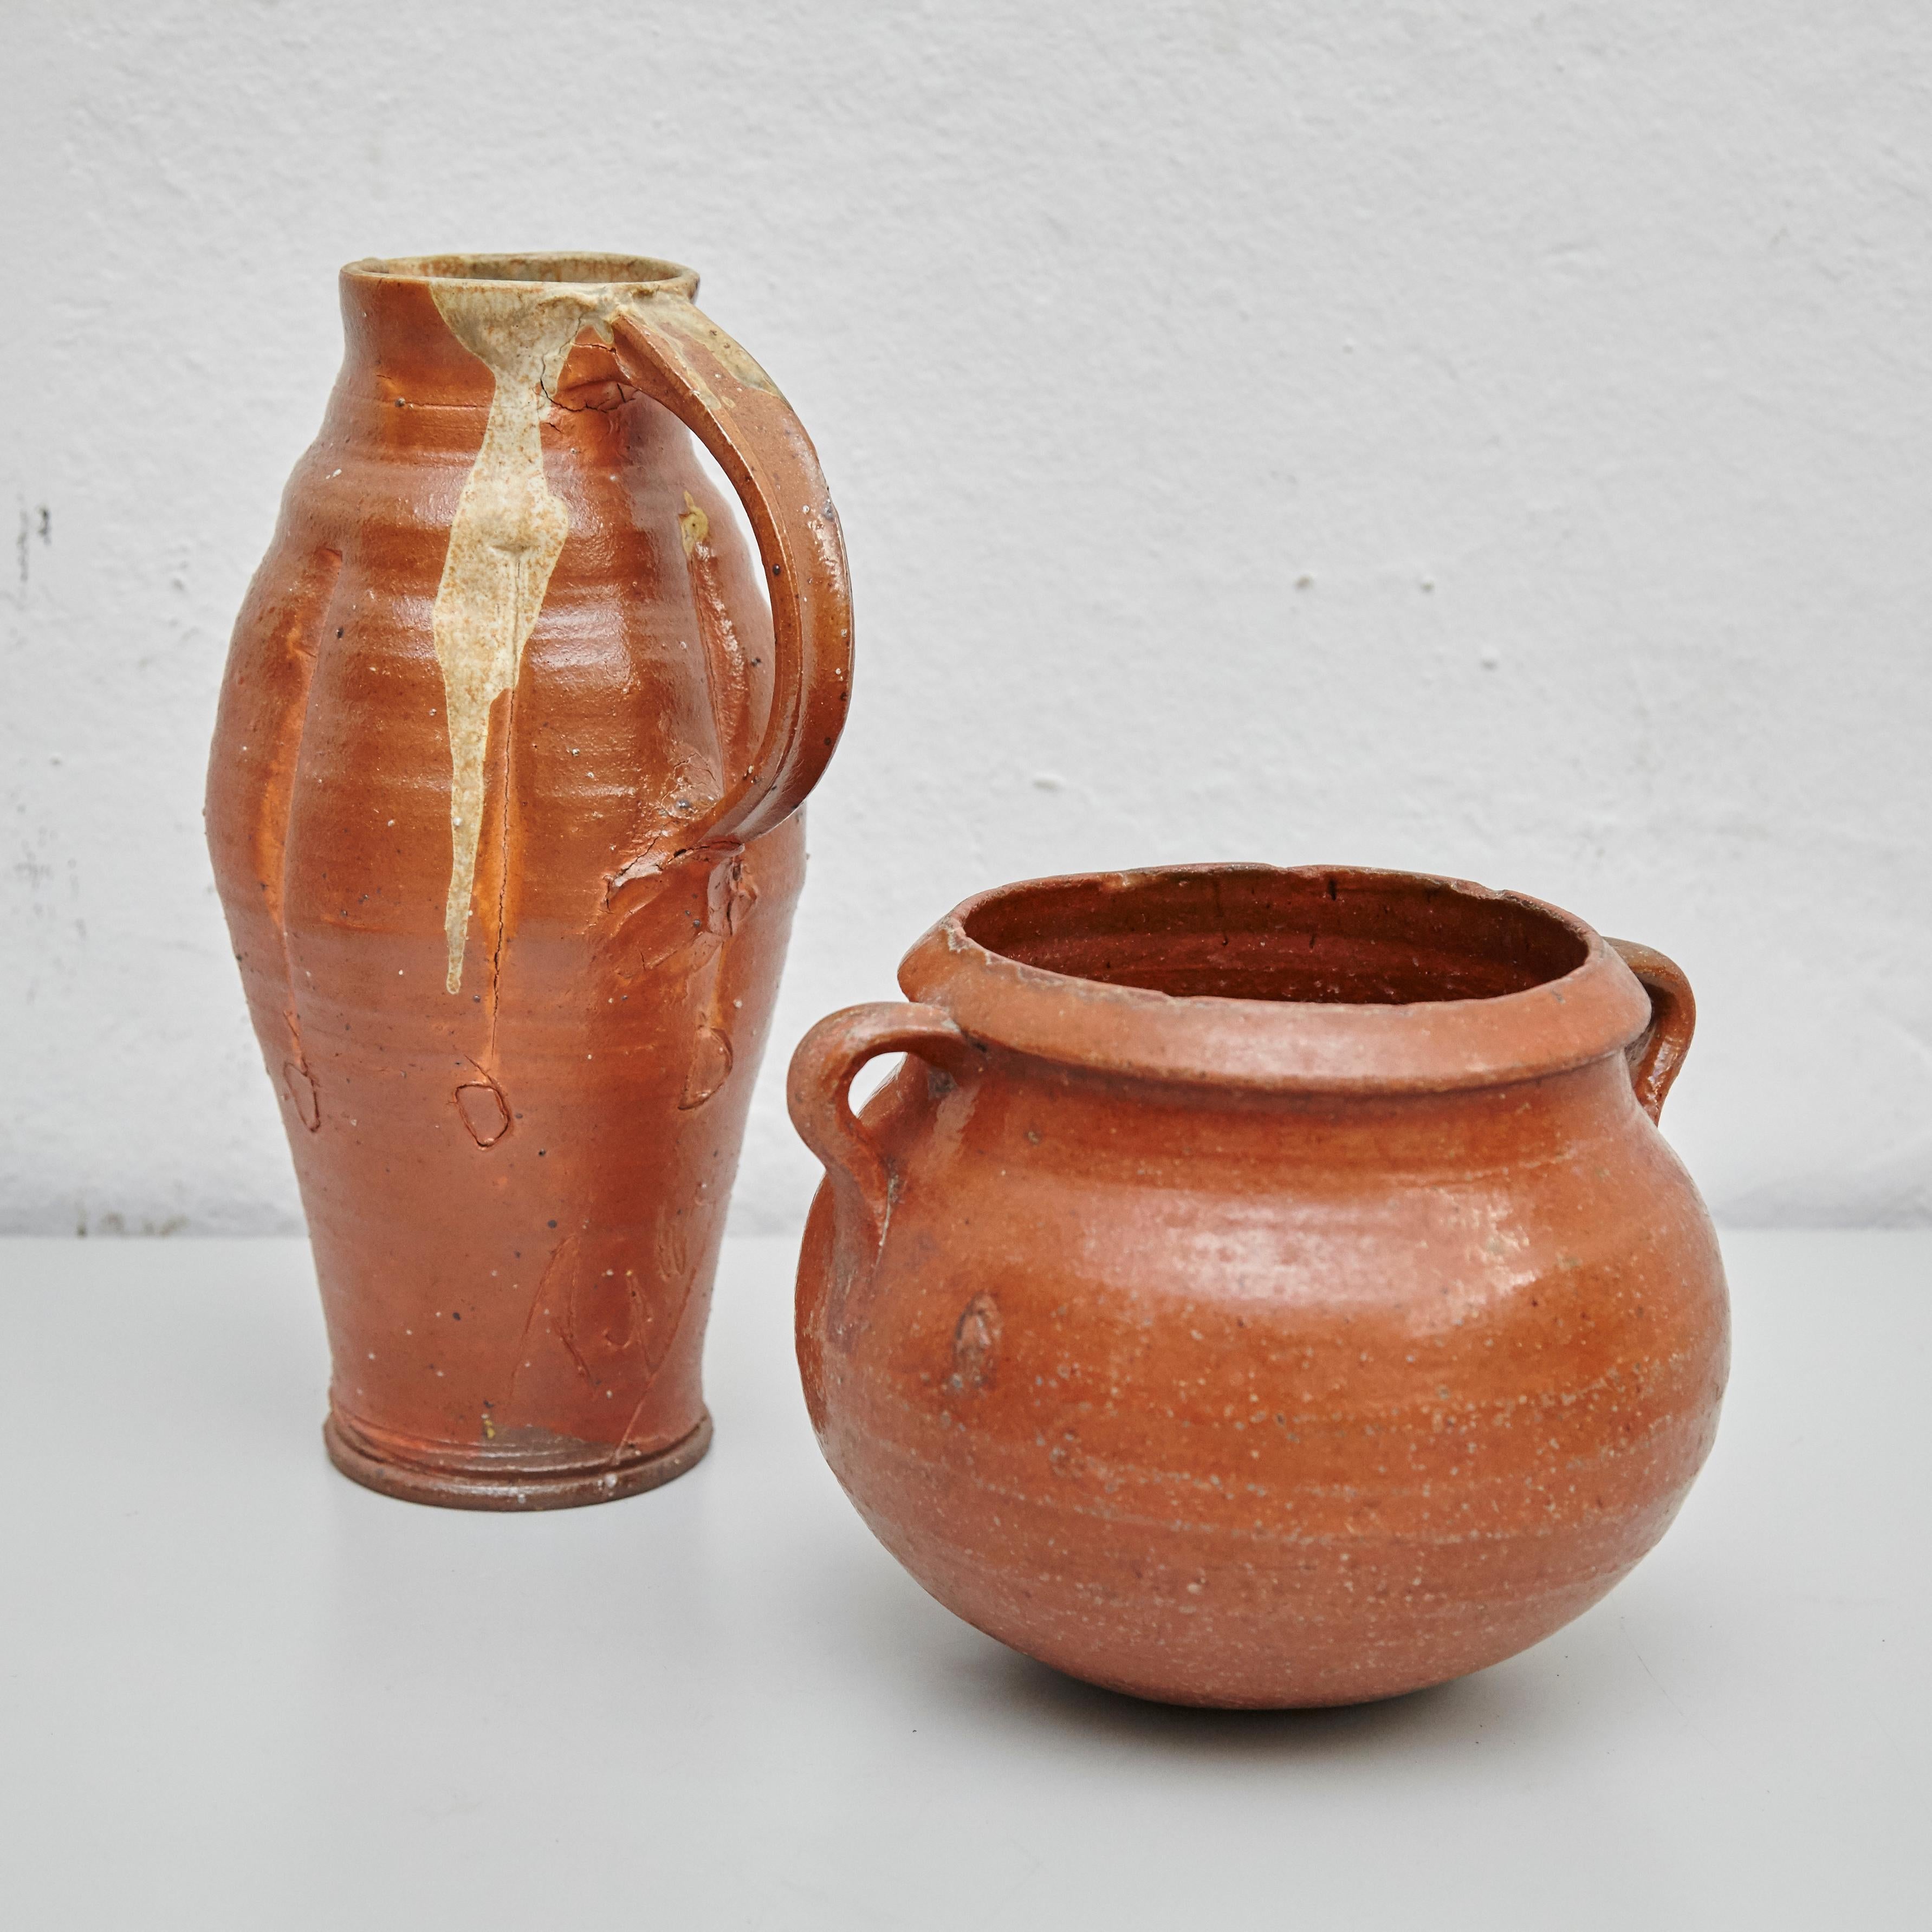 Set of two traditional Spanish ceramics.
Manufactured in Spain, circa 1970.

In original condition, with minor wear consistent with age and use, preserving a beautiful patina.

Measures: 20 cm diameter x 17 cm height
19 cm D x 16 cm W x 32cm H.